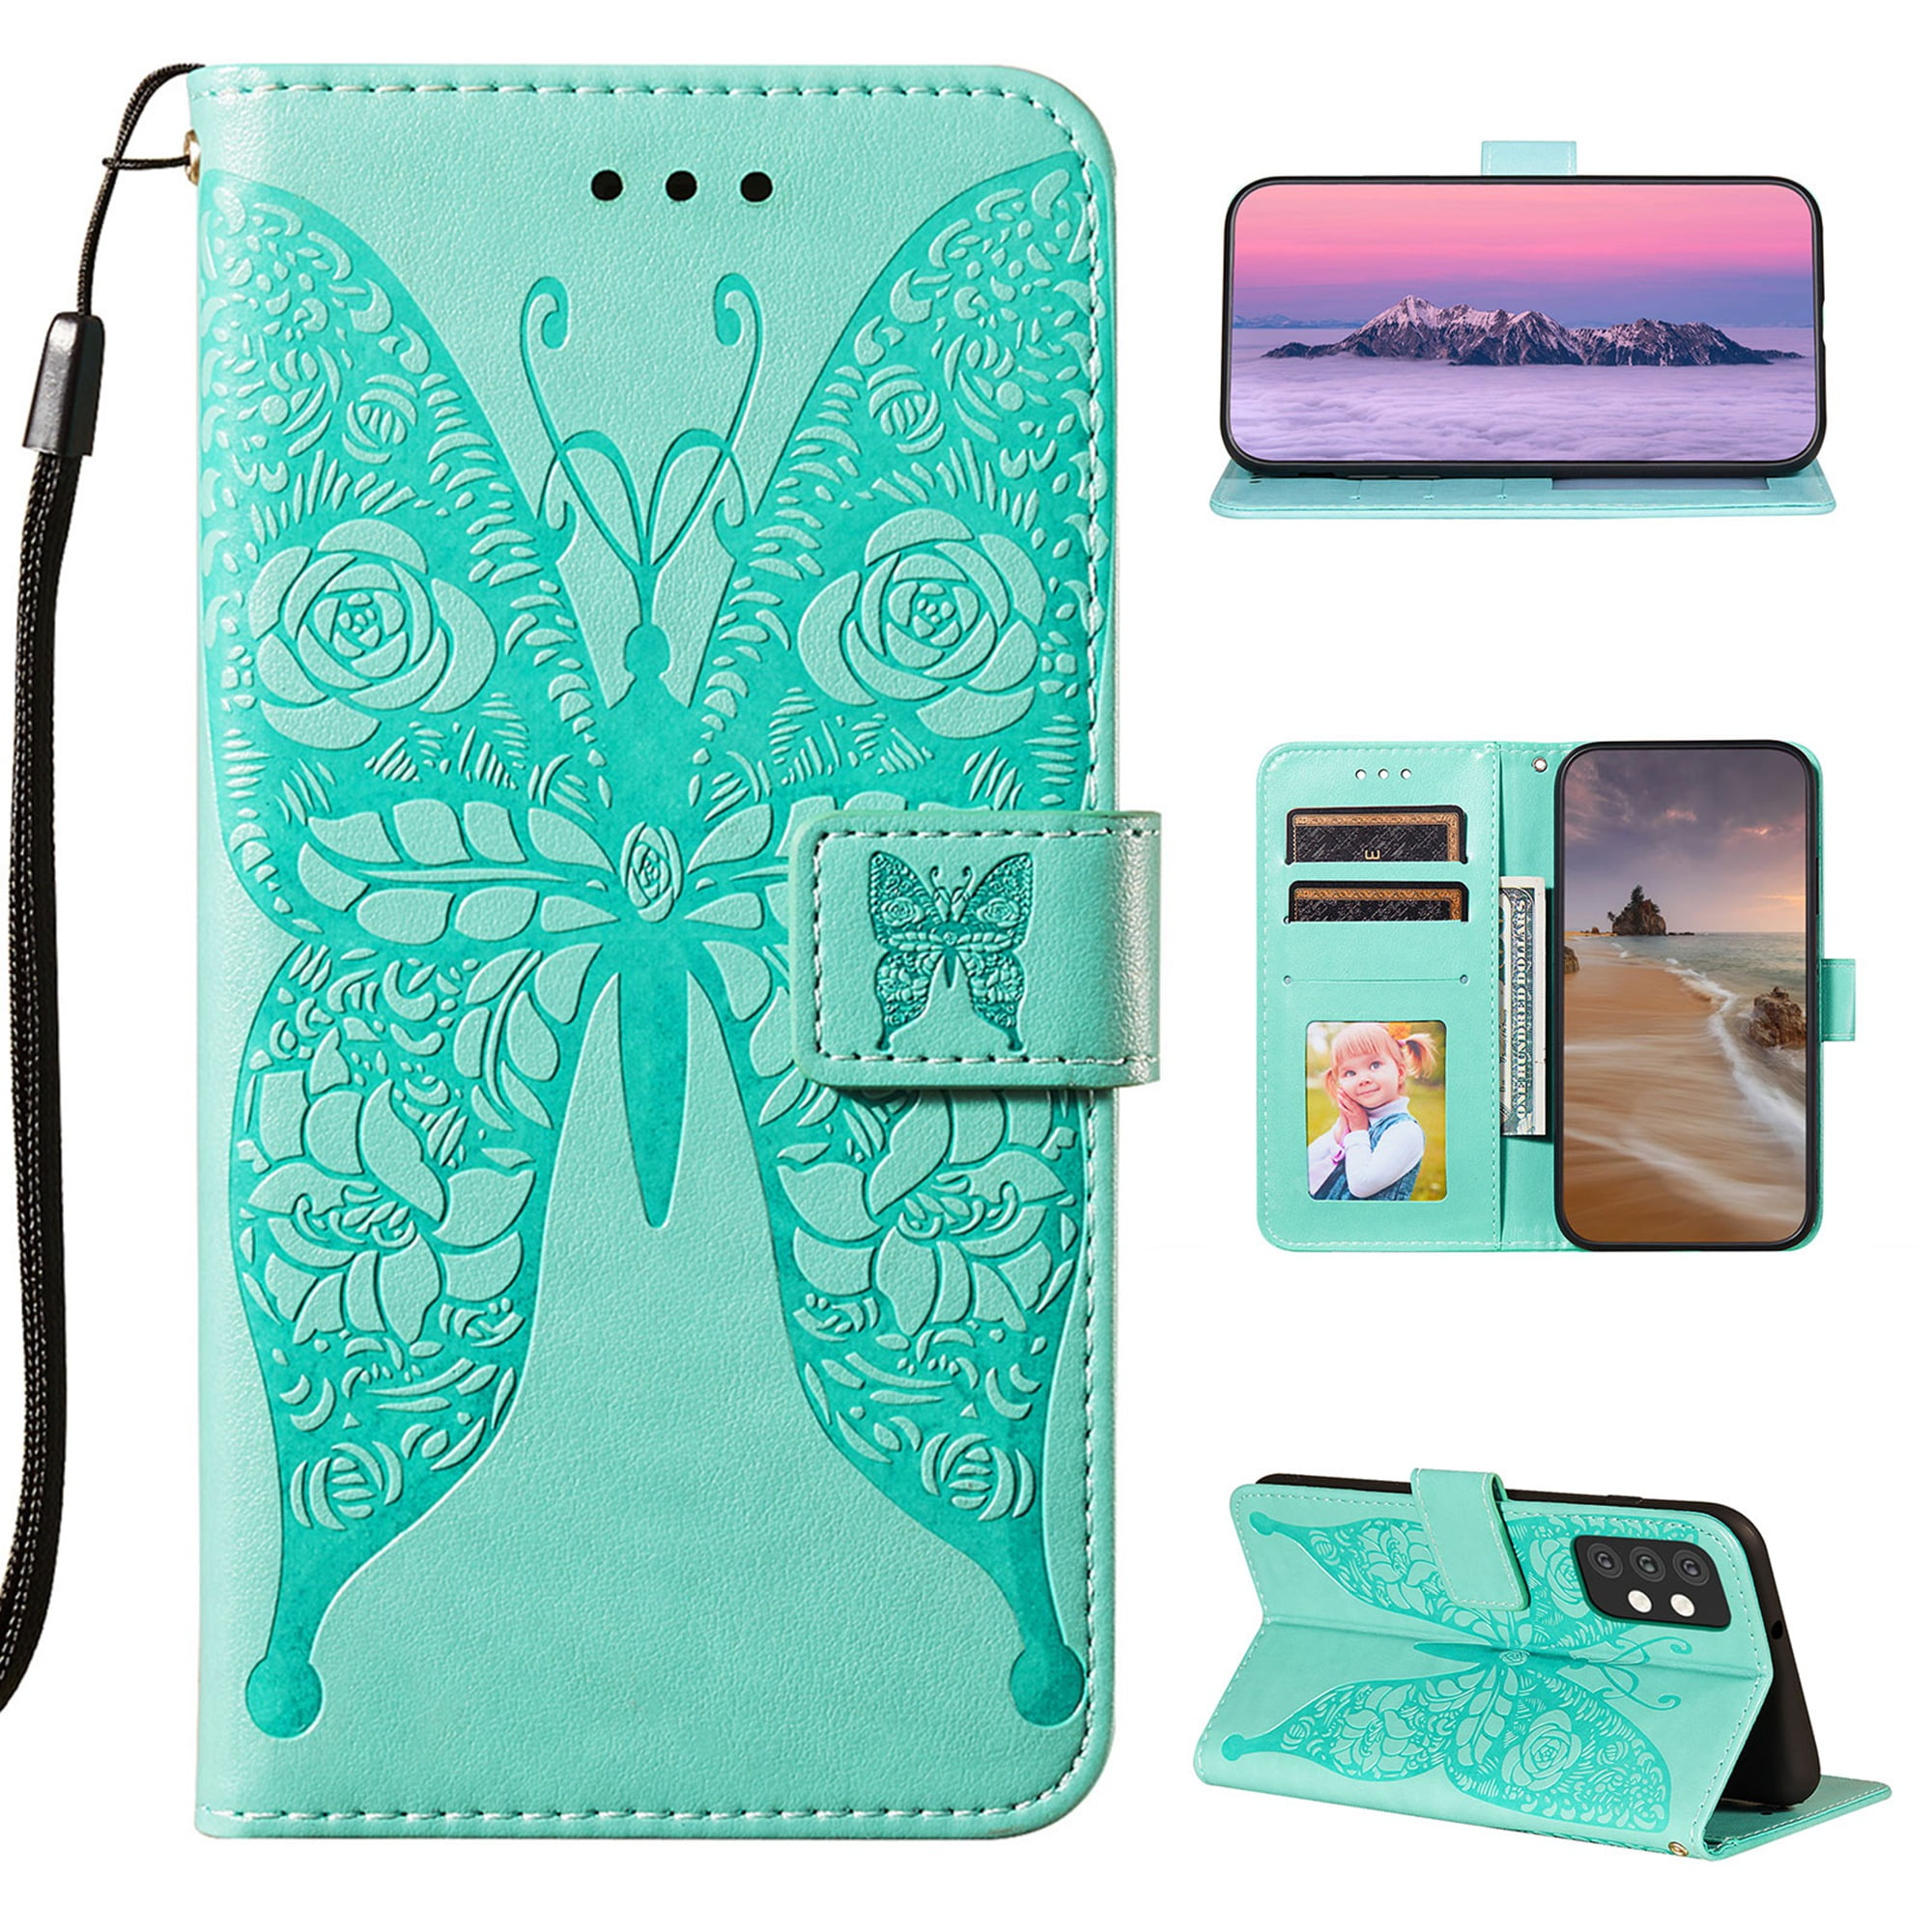 IKASEFU Compatible with Samsung Galaxy A10 Case Emboss butterfly Floral Pu Leather Wallet Strap Card Slots Shockproof Magnetic Stand Feature Folio Flip Book Cover Protective Case-Pink 